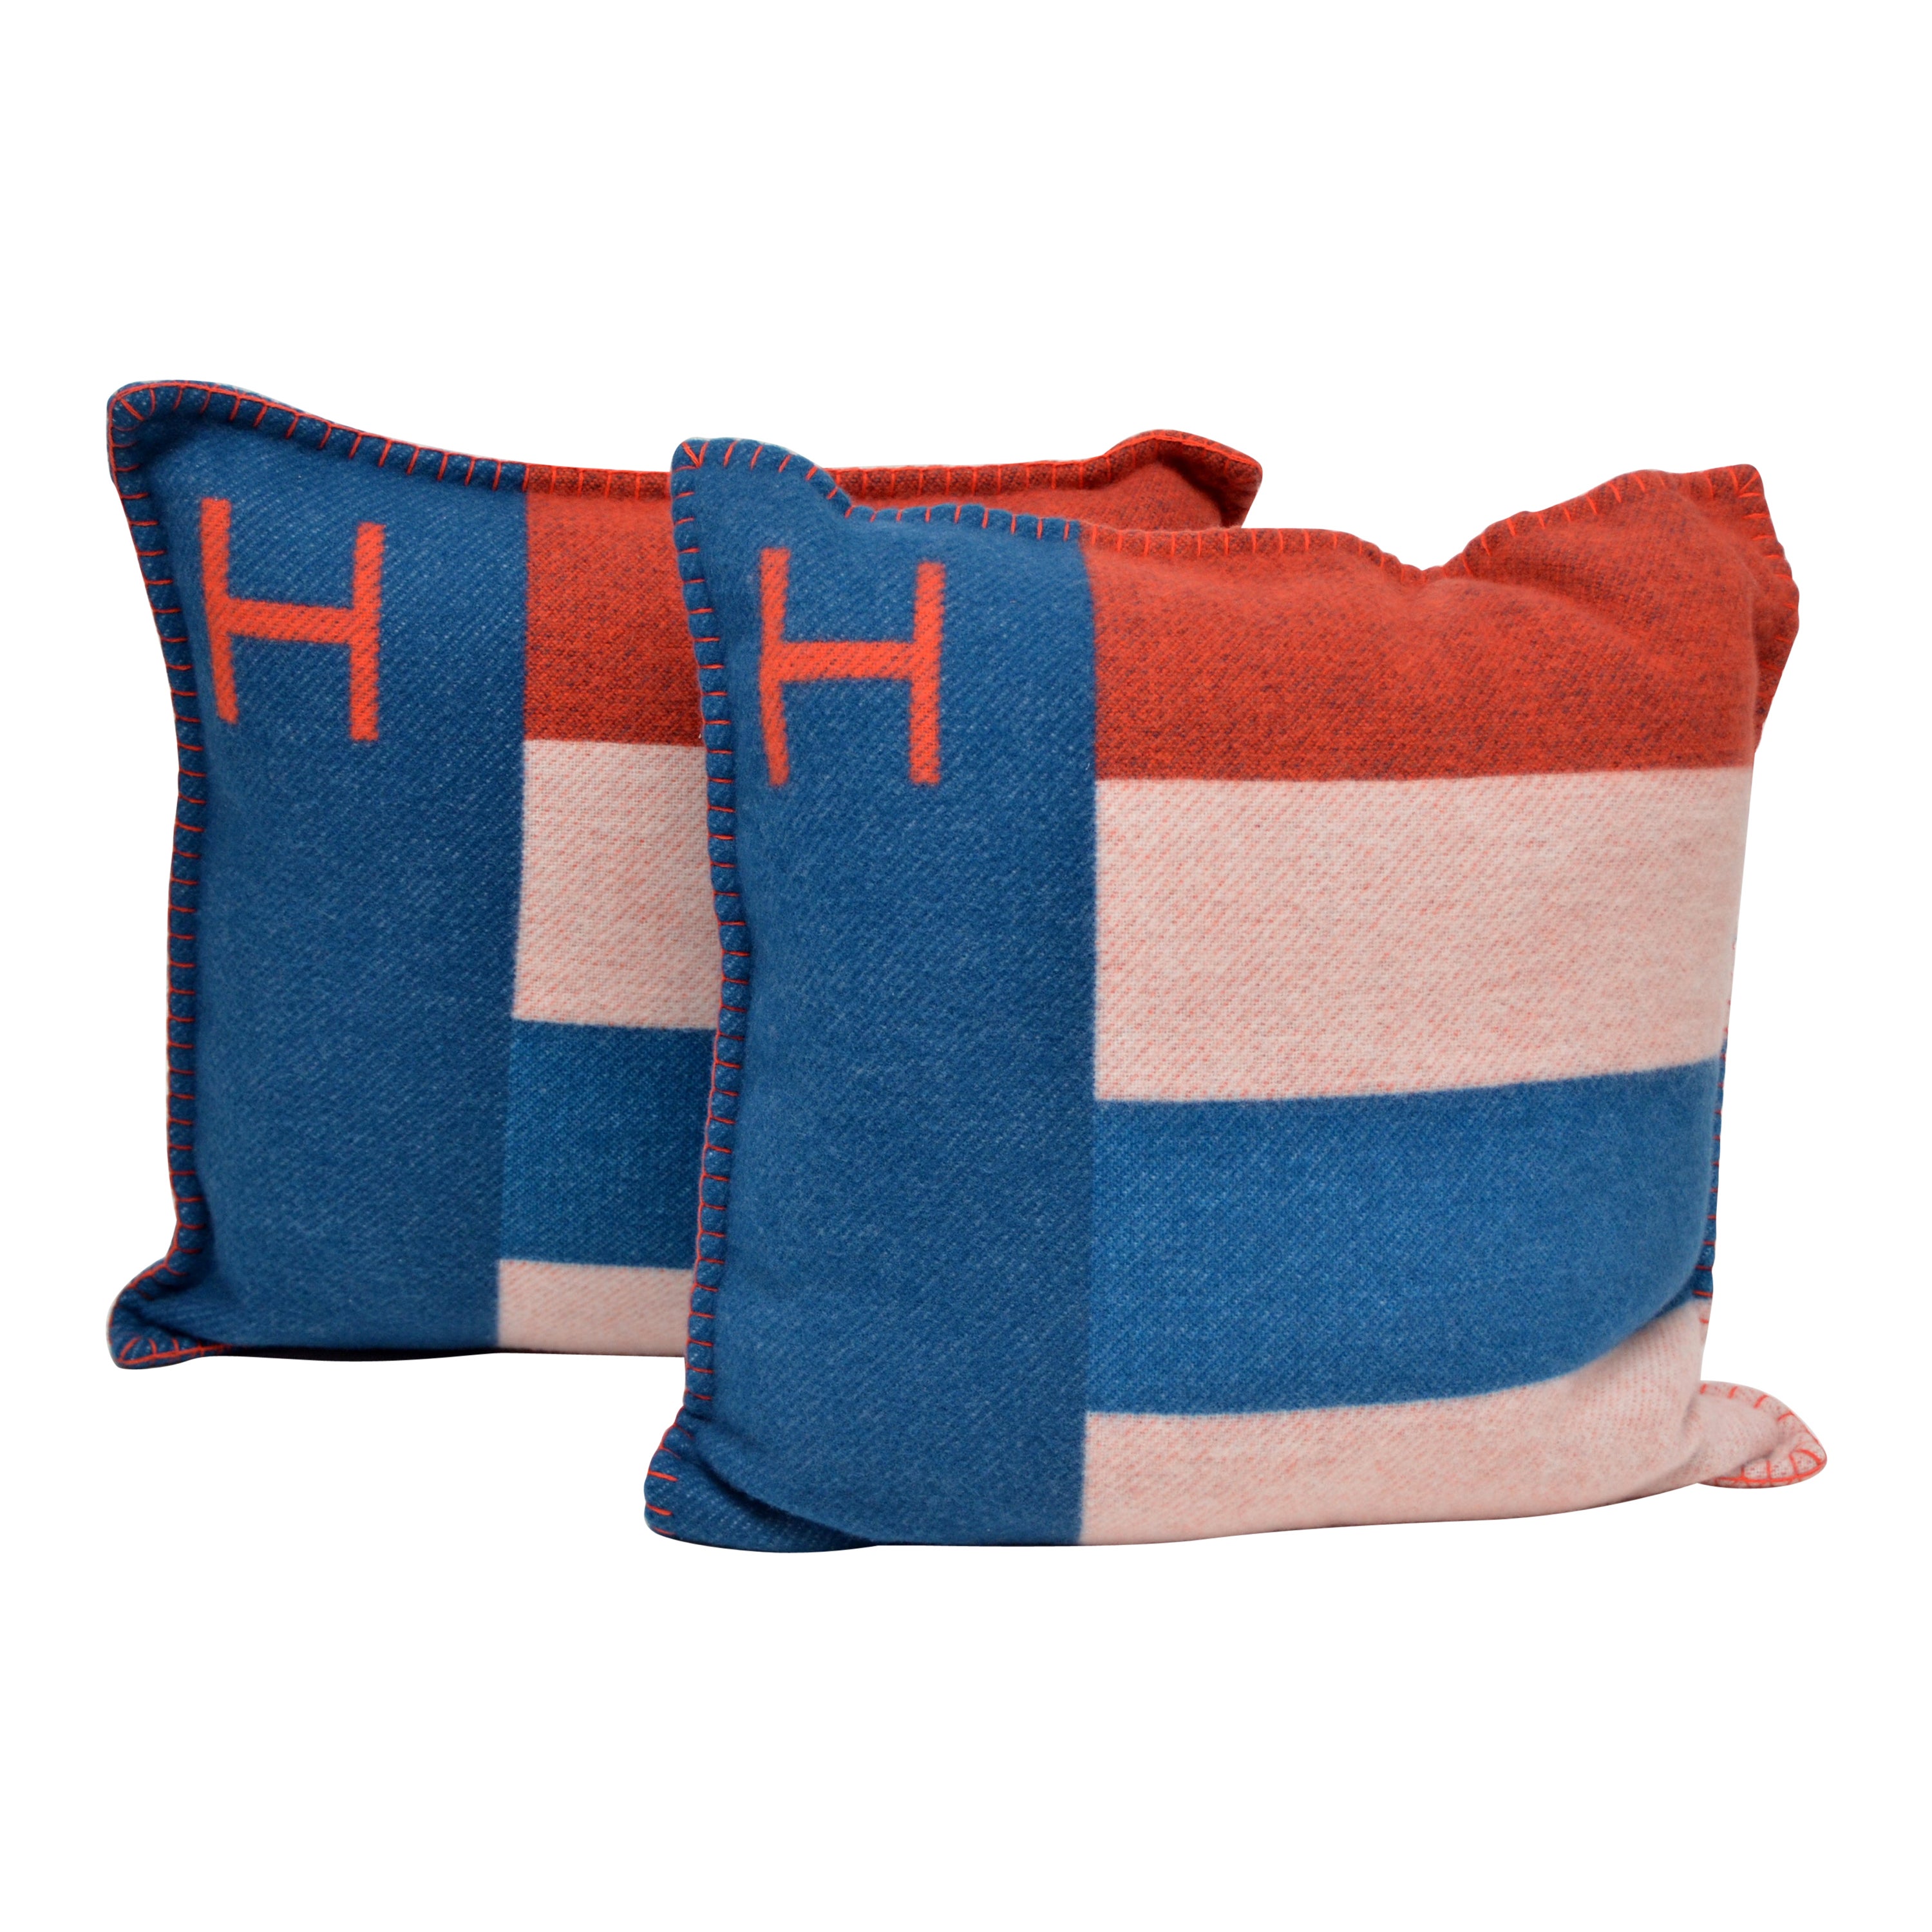 Hermes Casaque  Merino Pillow Cushion Set /Two Bleu/Gre  New With Tags  50x50 SZ